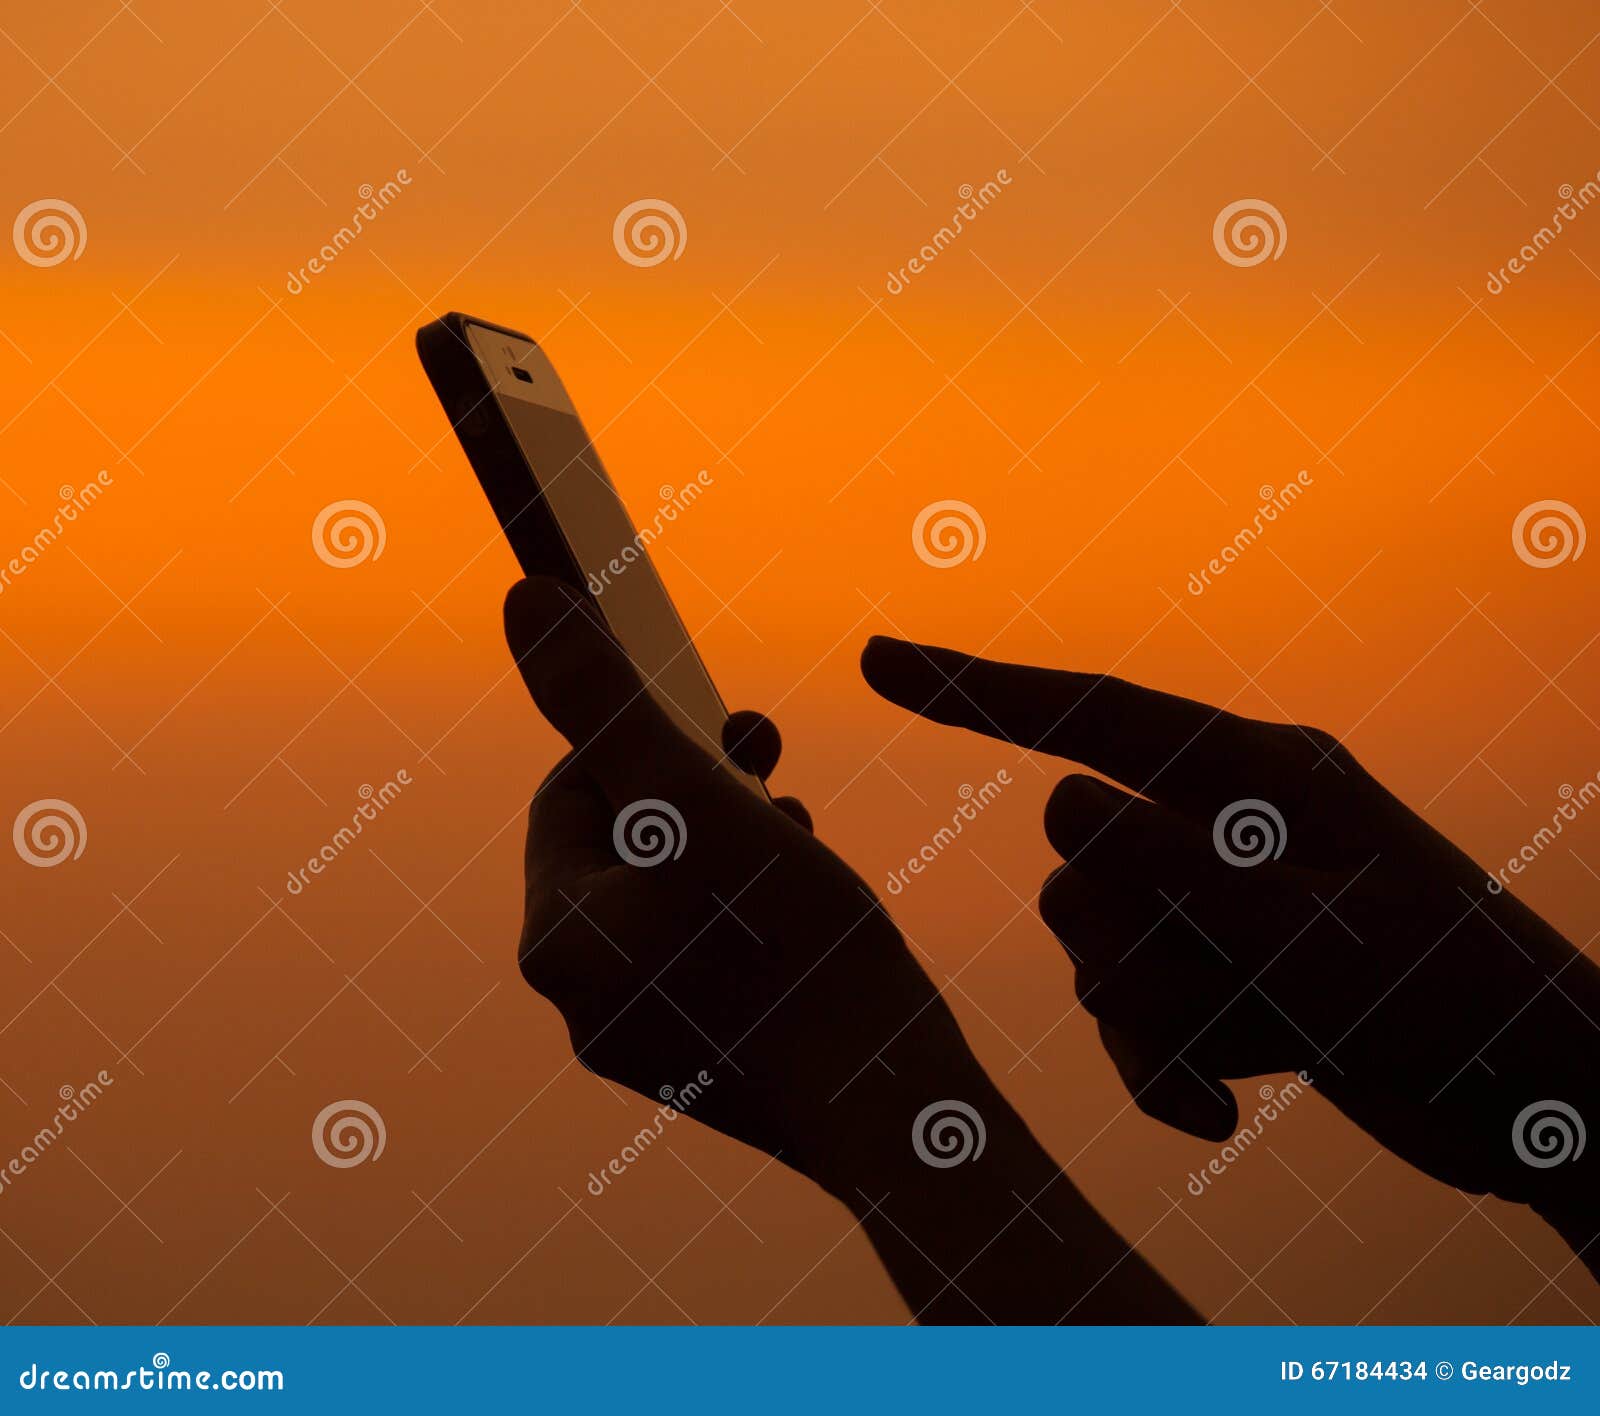 silhouette of hand using mobile device